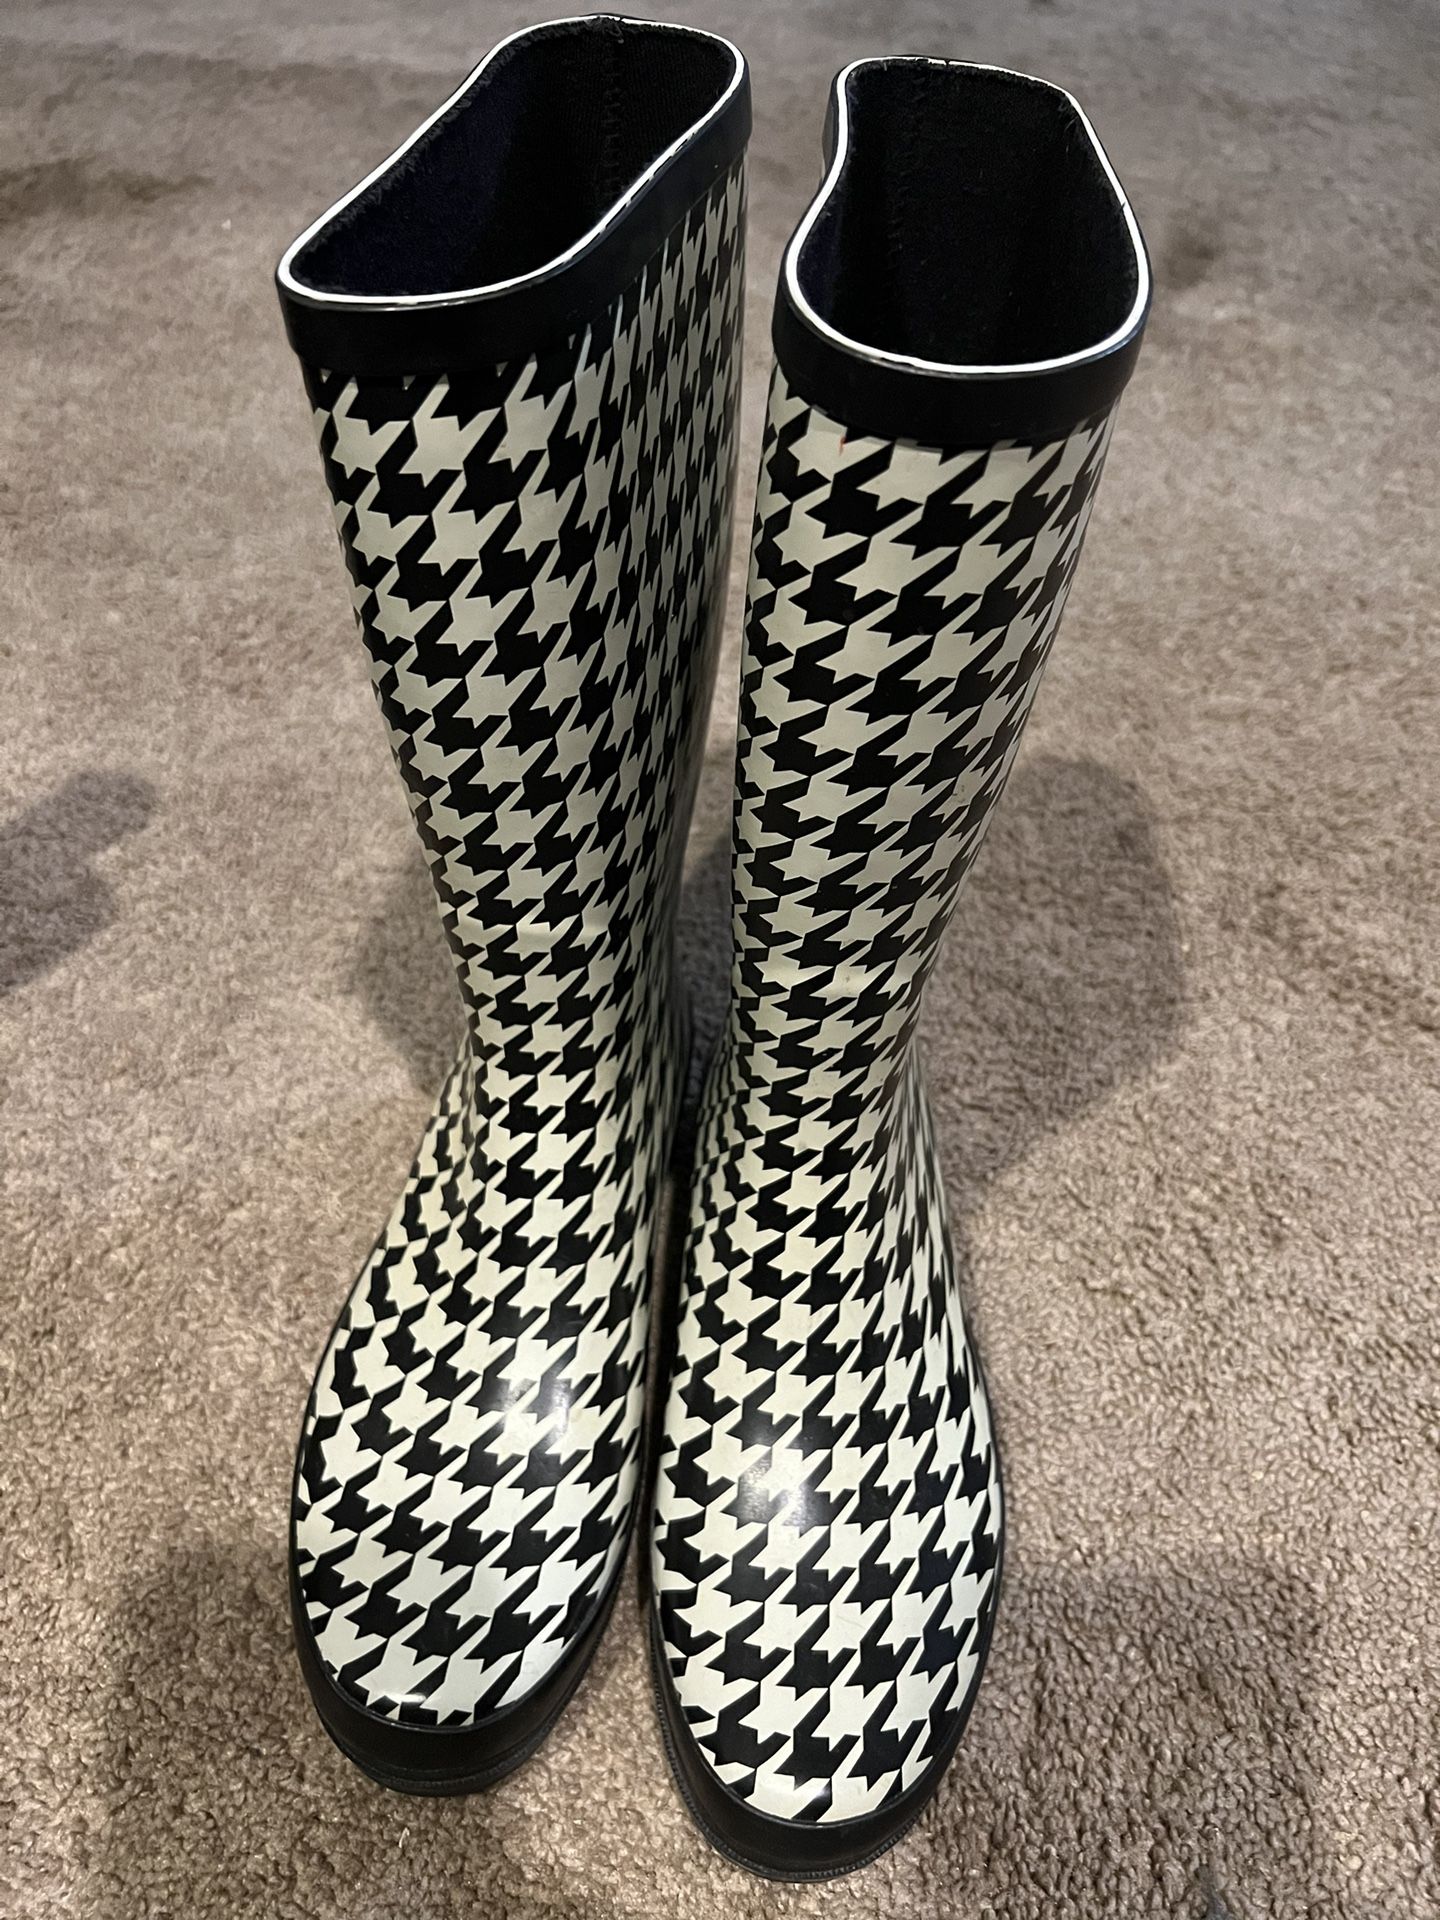 Houndstooth Rain Boots Size 9